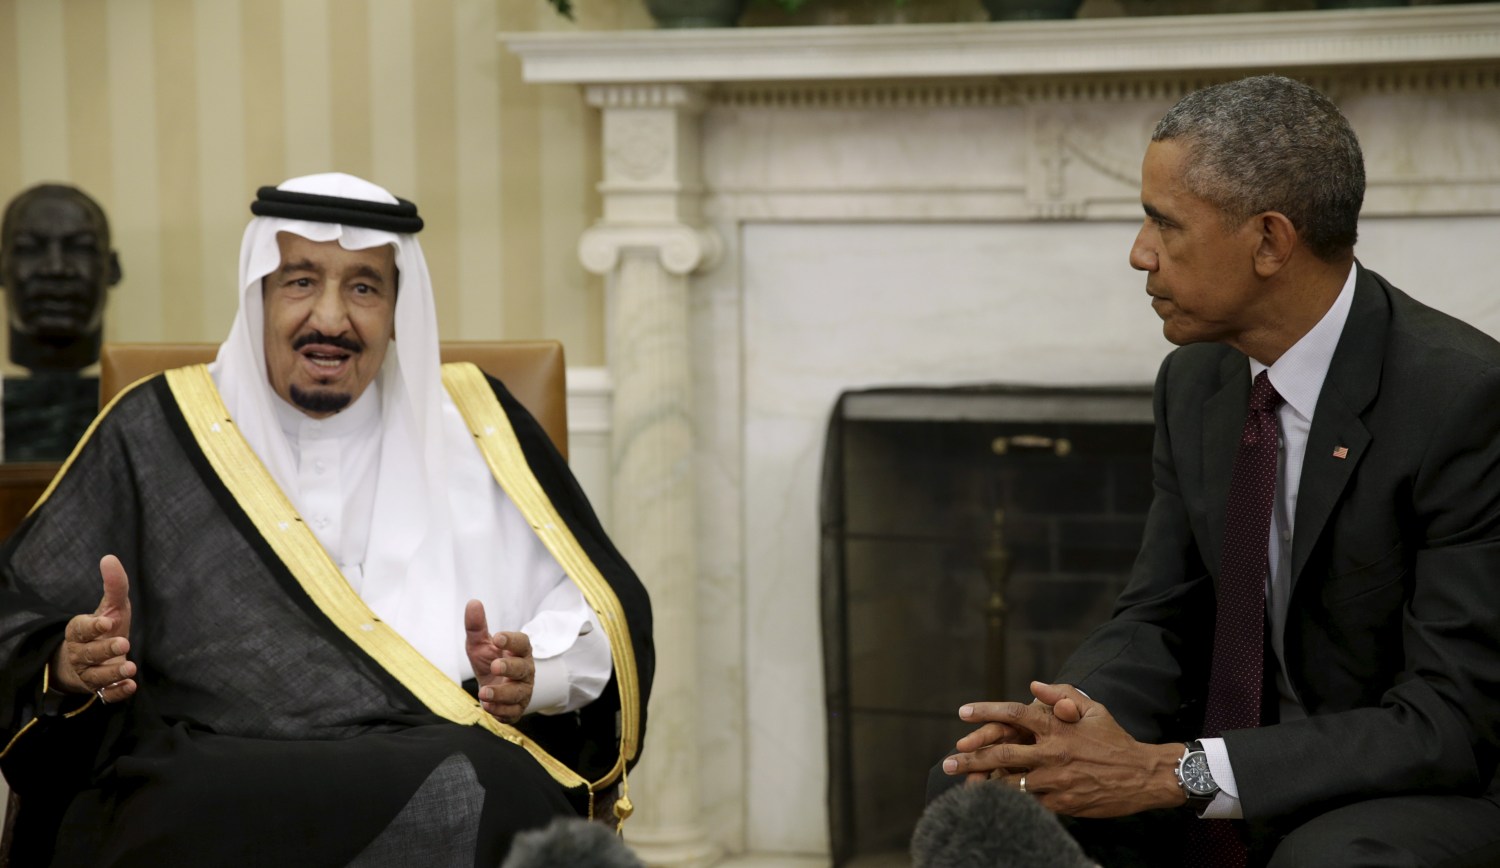 U.S. President Barack Obama (R) meets with Saudi King Salman bin Abdulaziz in the Oval Office of the White House in Washington September 4, 2015. This is the king's first visit to the United States since ascending to the throne in January. REUTERS/Gary Cameron